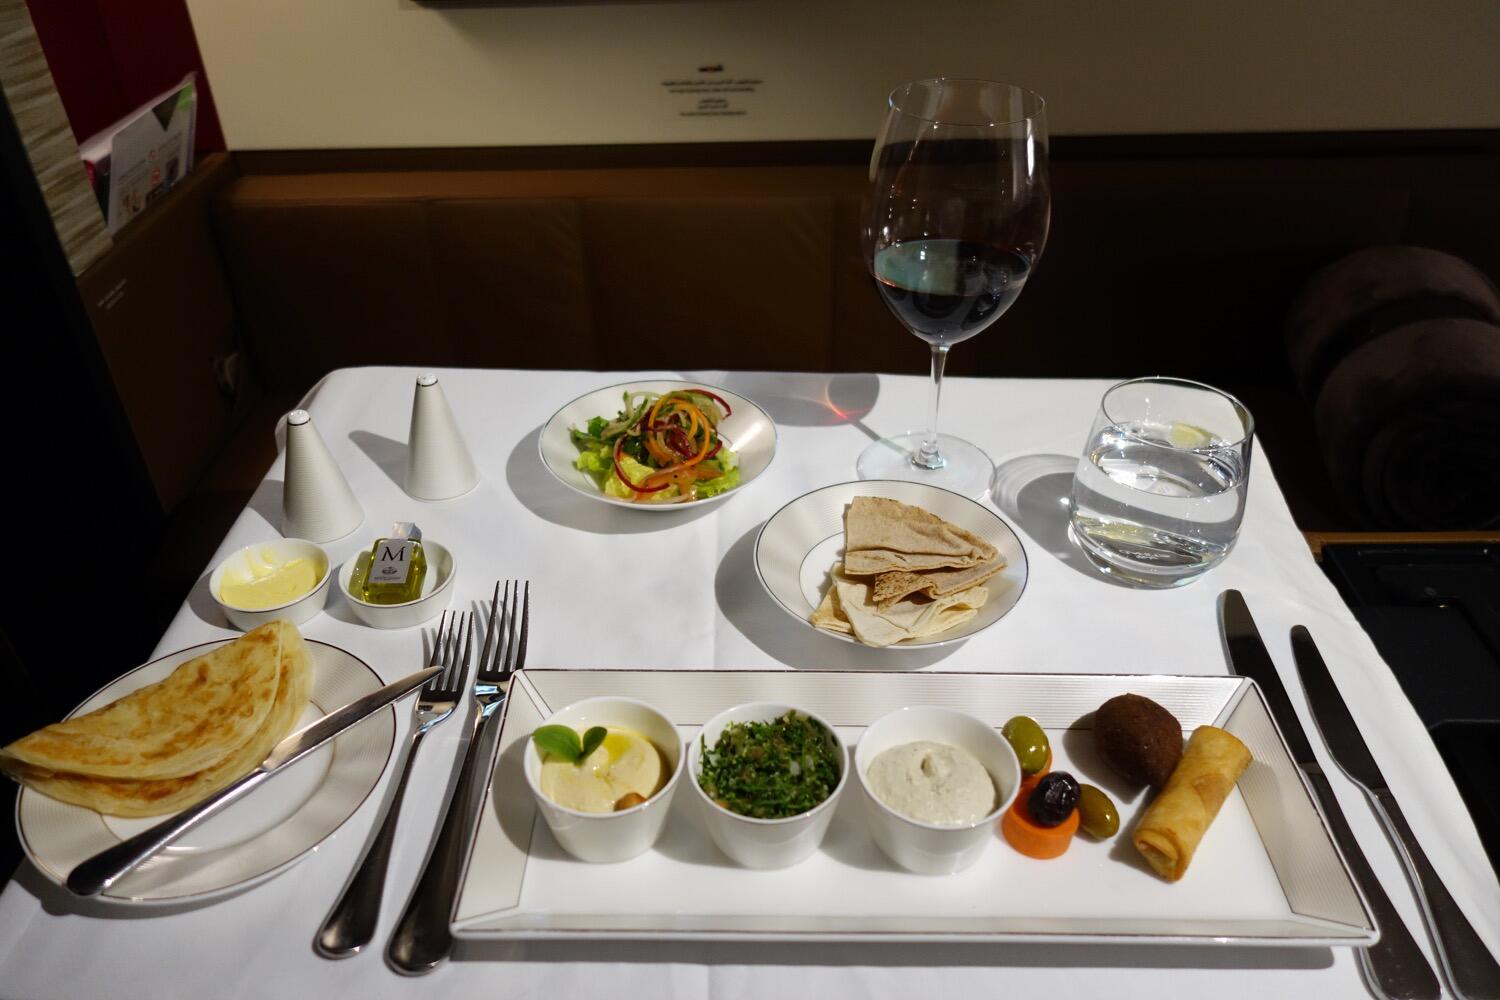 Mezze in the first-class Etihad Airlines A380 suite